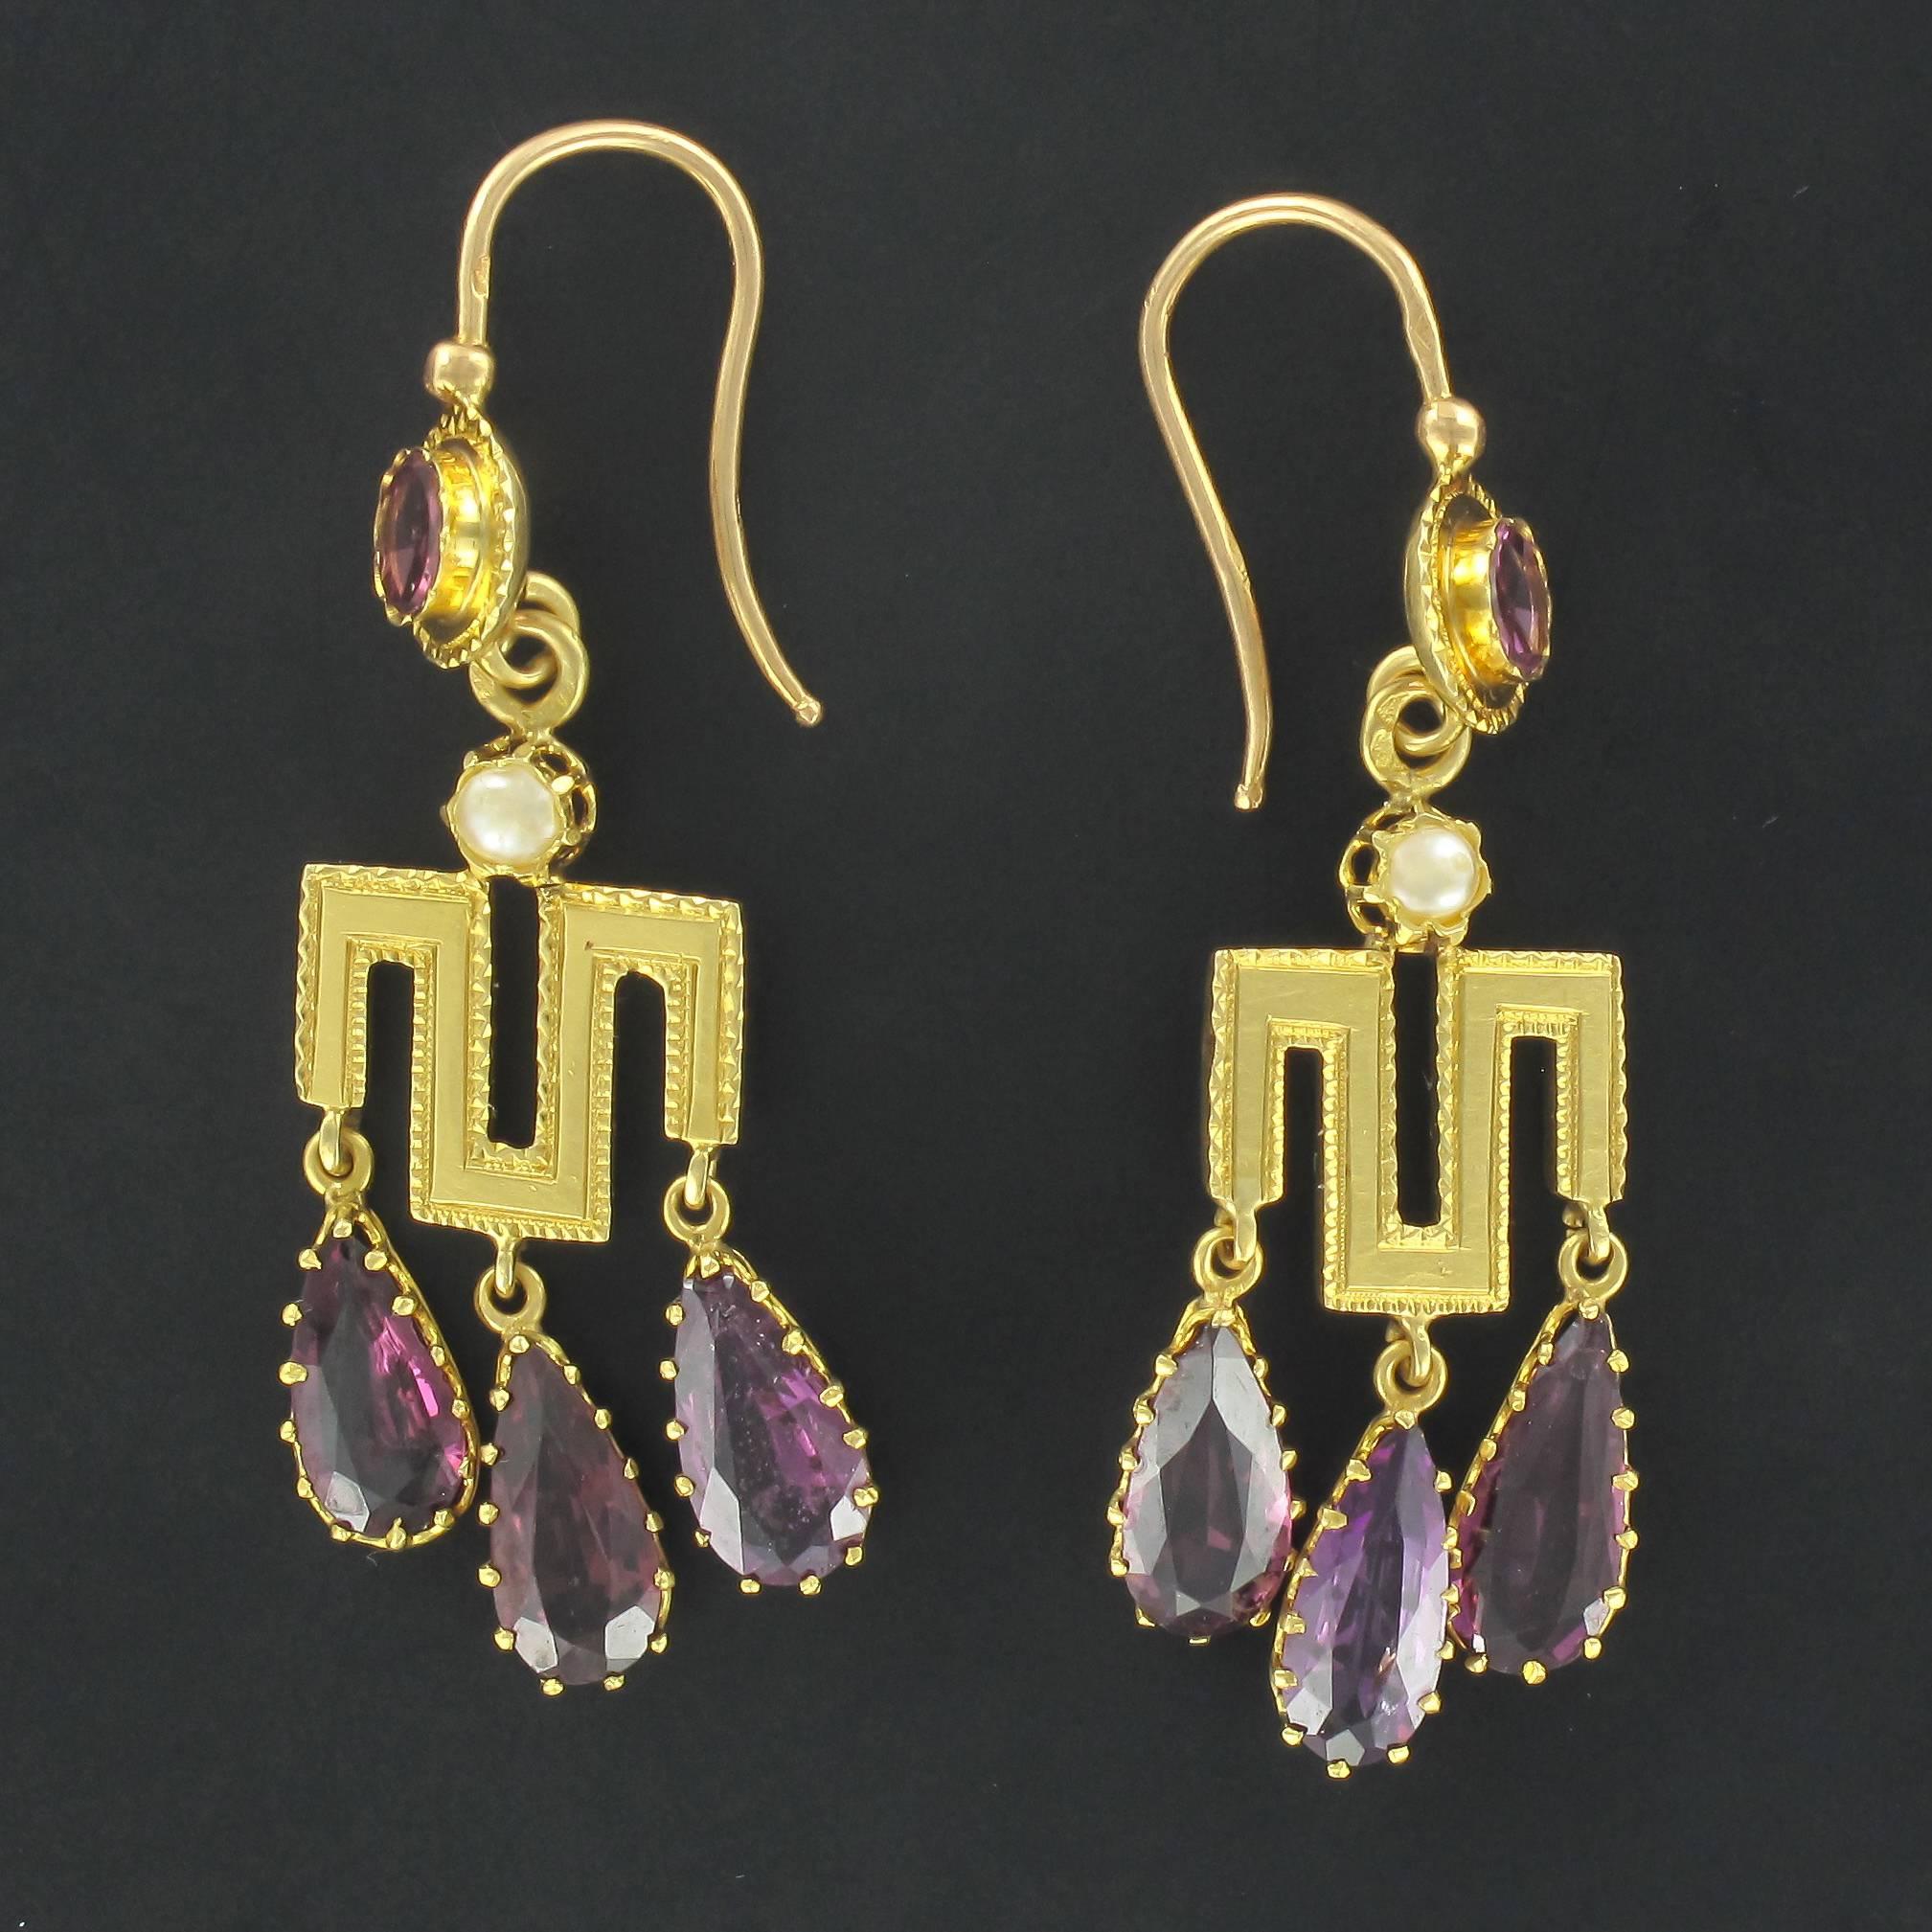 Earrings in 18 carat yellow gold, eagle head hallmark.

Each drop earring is composed of a bezel set round garnet from which is suspended a claw set fine pearl and an openwork Greek style motif with a chiselled border. 3 claw set pear cut garnets